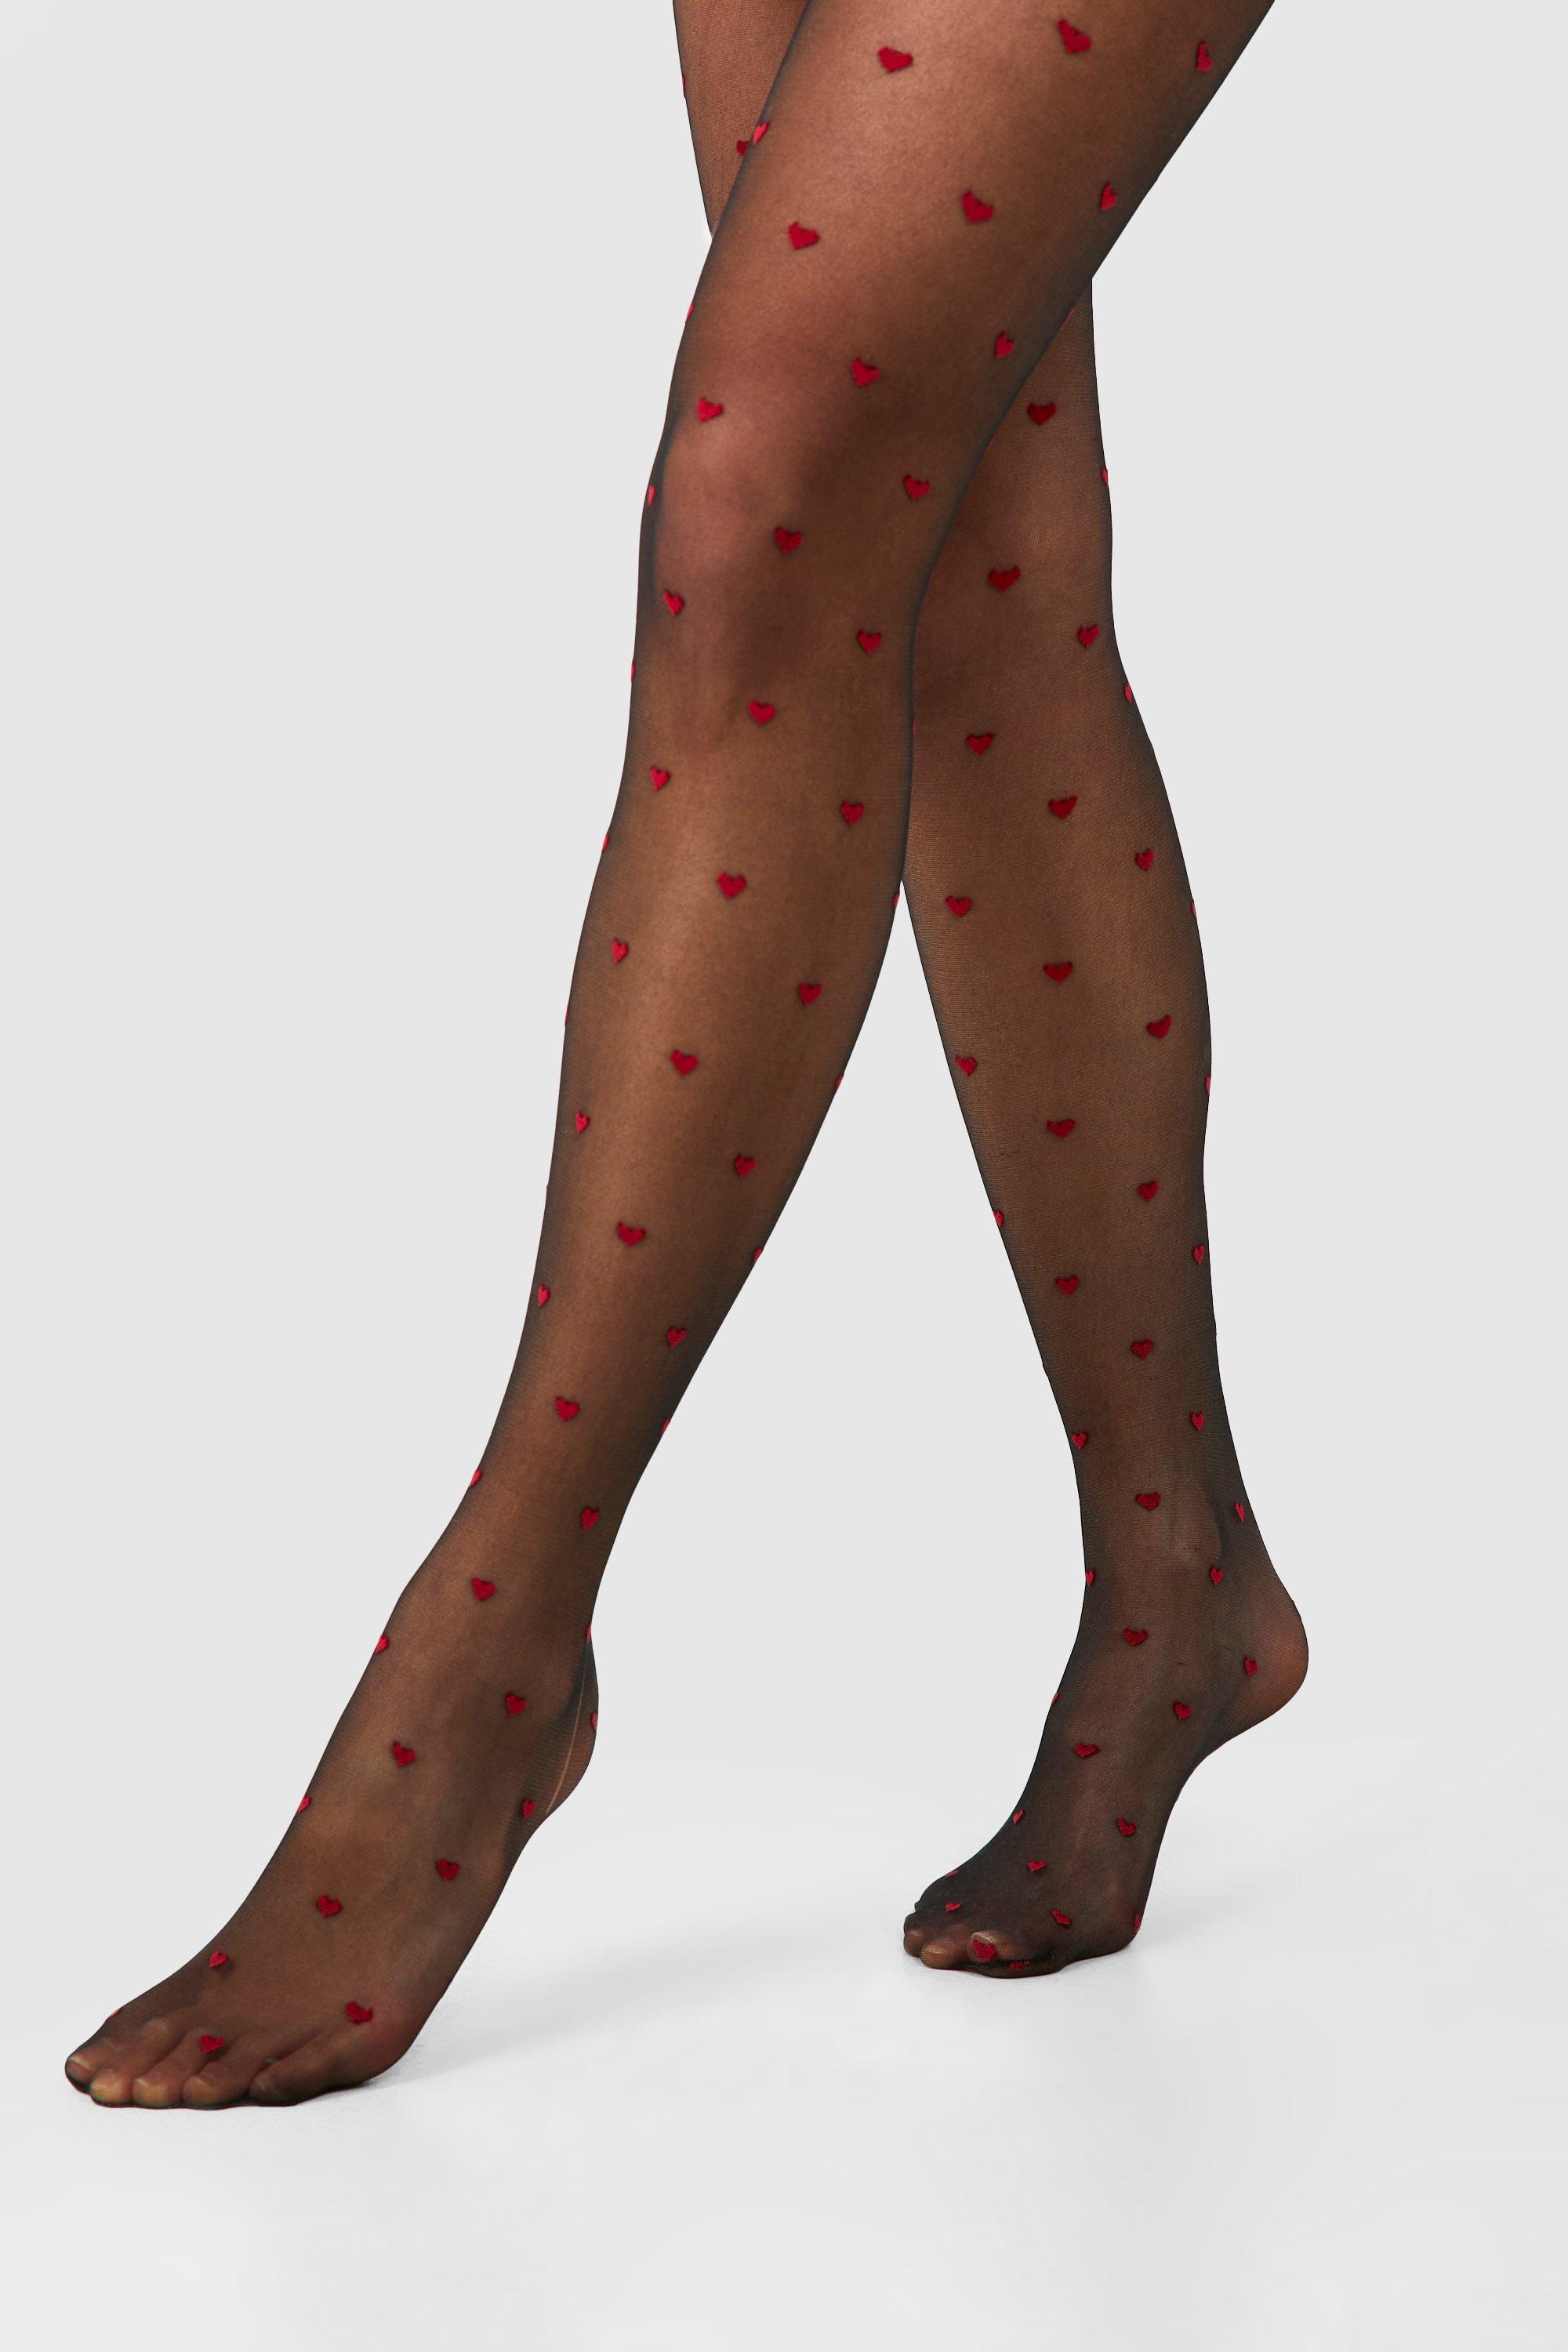 Pretty Polly Sheer Heart Tights One Size Black/Red - PNAWJ2